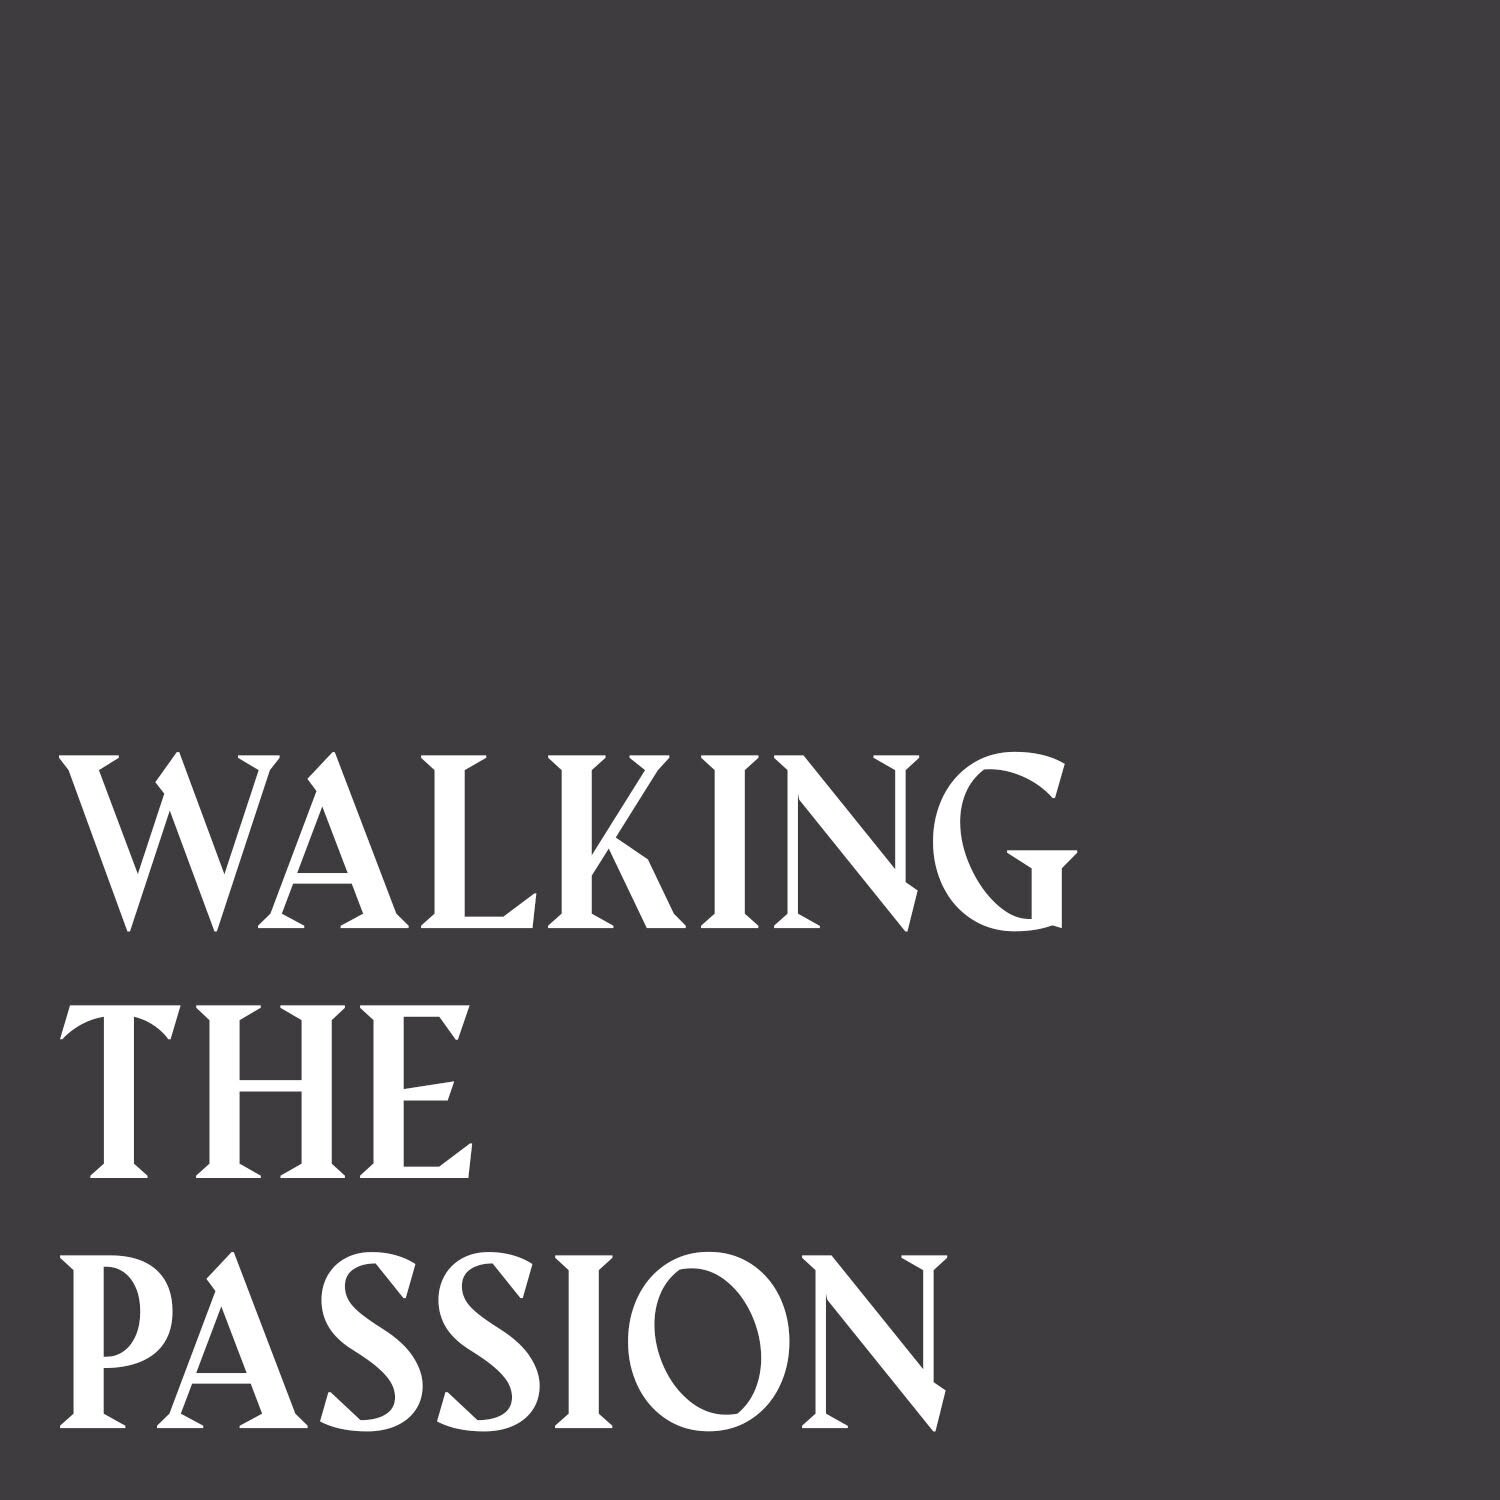 Go In Peace—The Conclusion to “Walking the Passion”